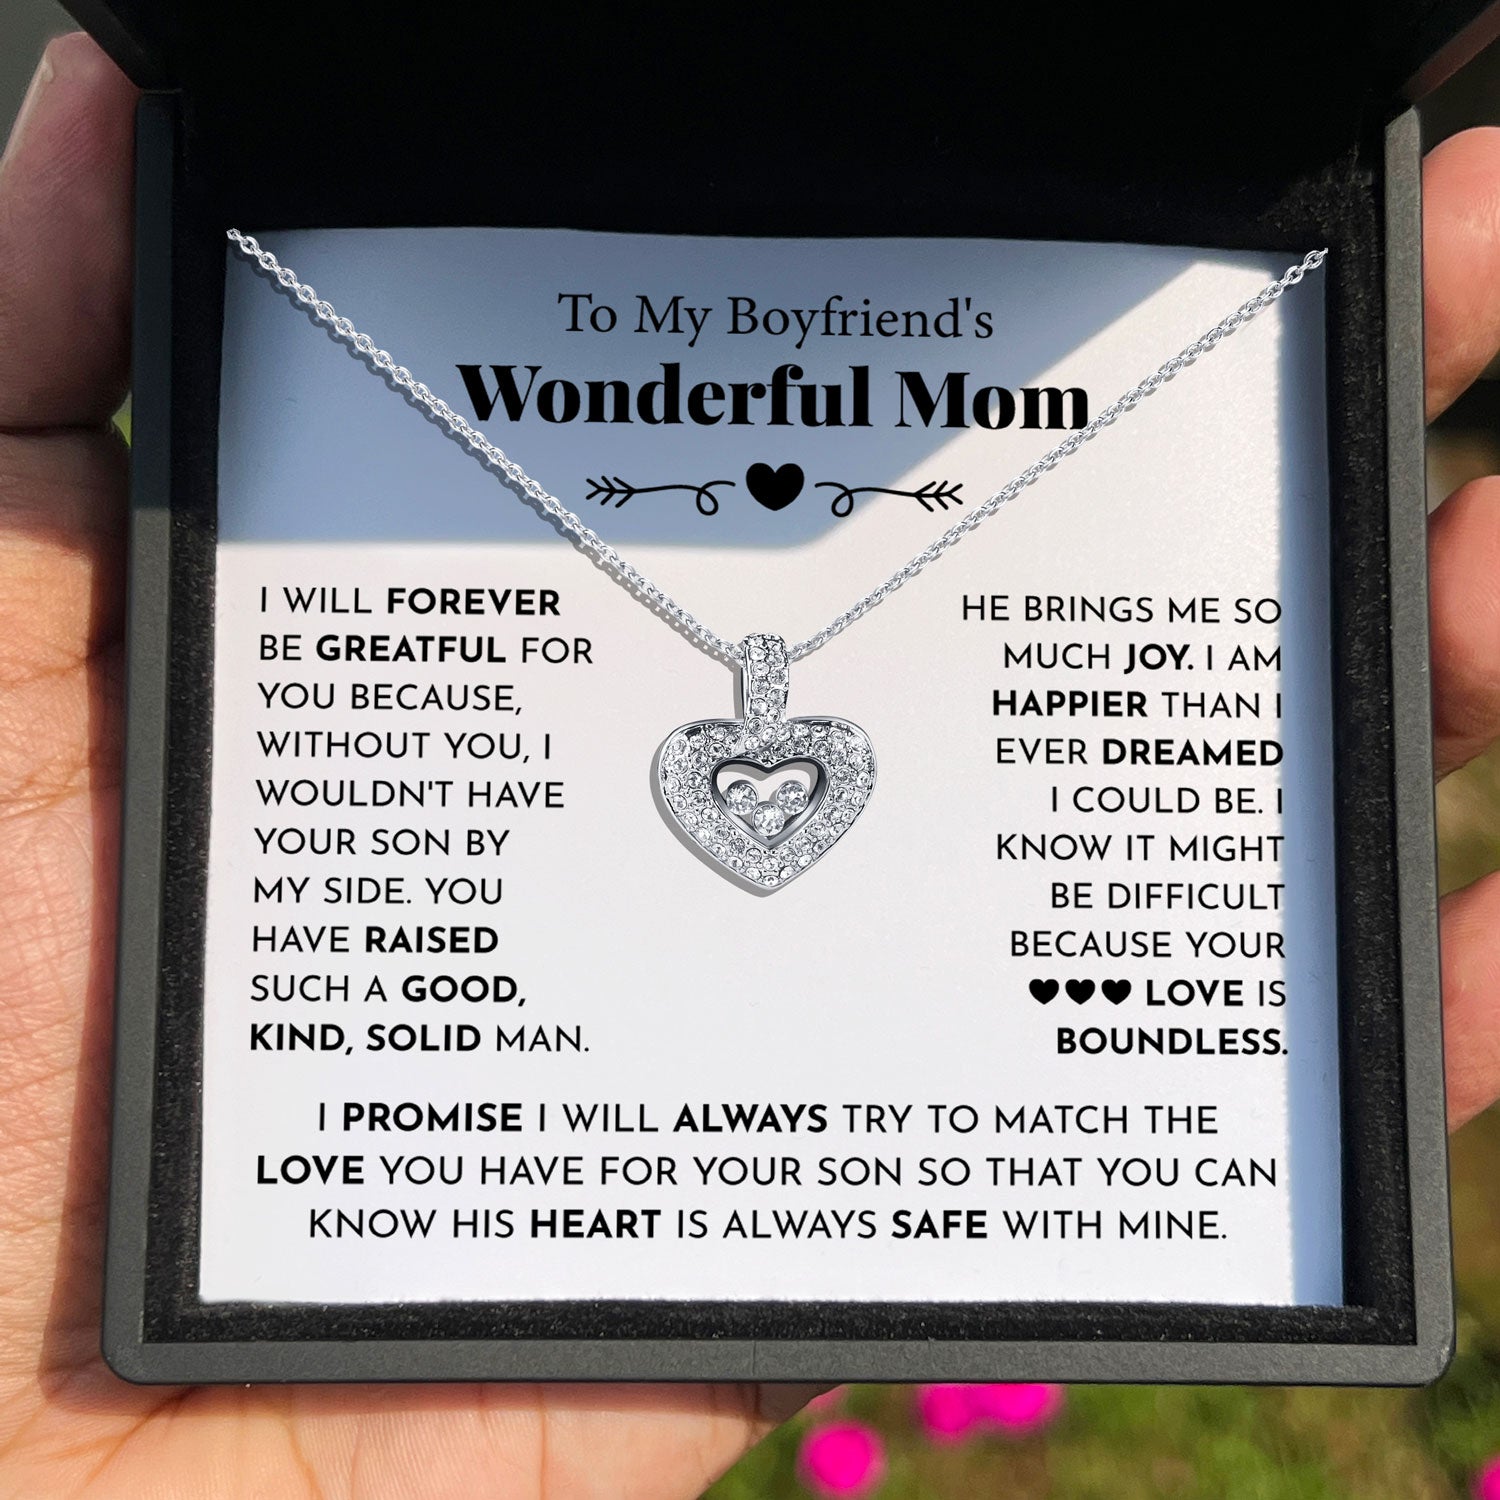 To My Boyfriend's Wonderful Mom - You Have Raised Such a Good, Kind, Solid Man - Tryndi Floating Heart Necklace